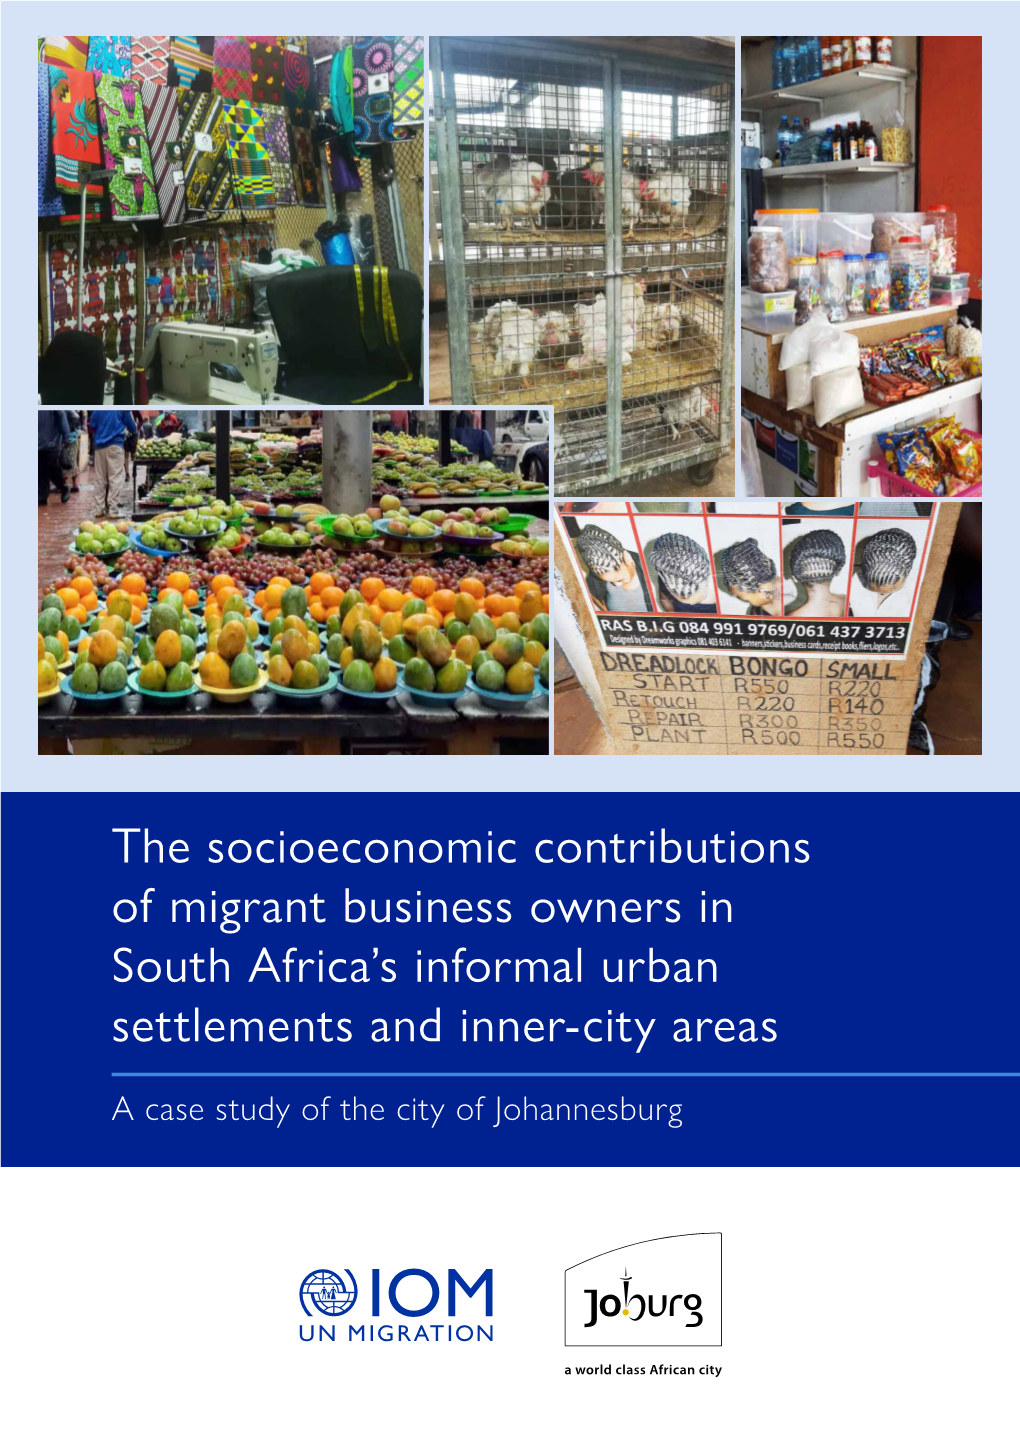 The Socioeconomic Contributions of Migrant Business Owners in South Africa’S Informal Urban Settlements and Inner-City Areas